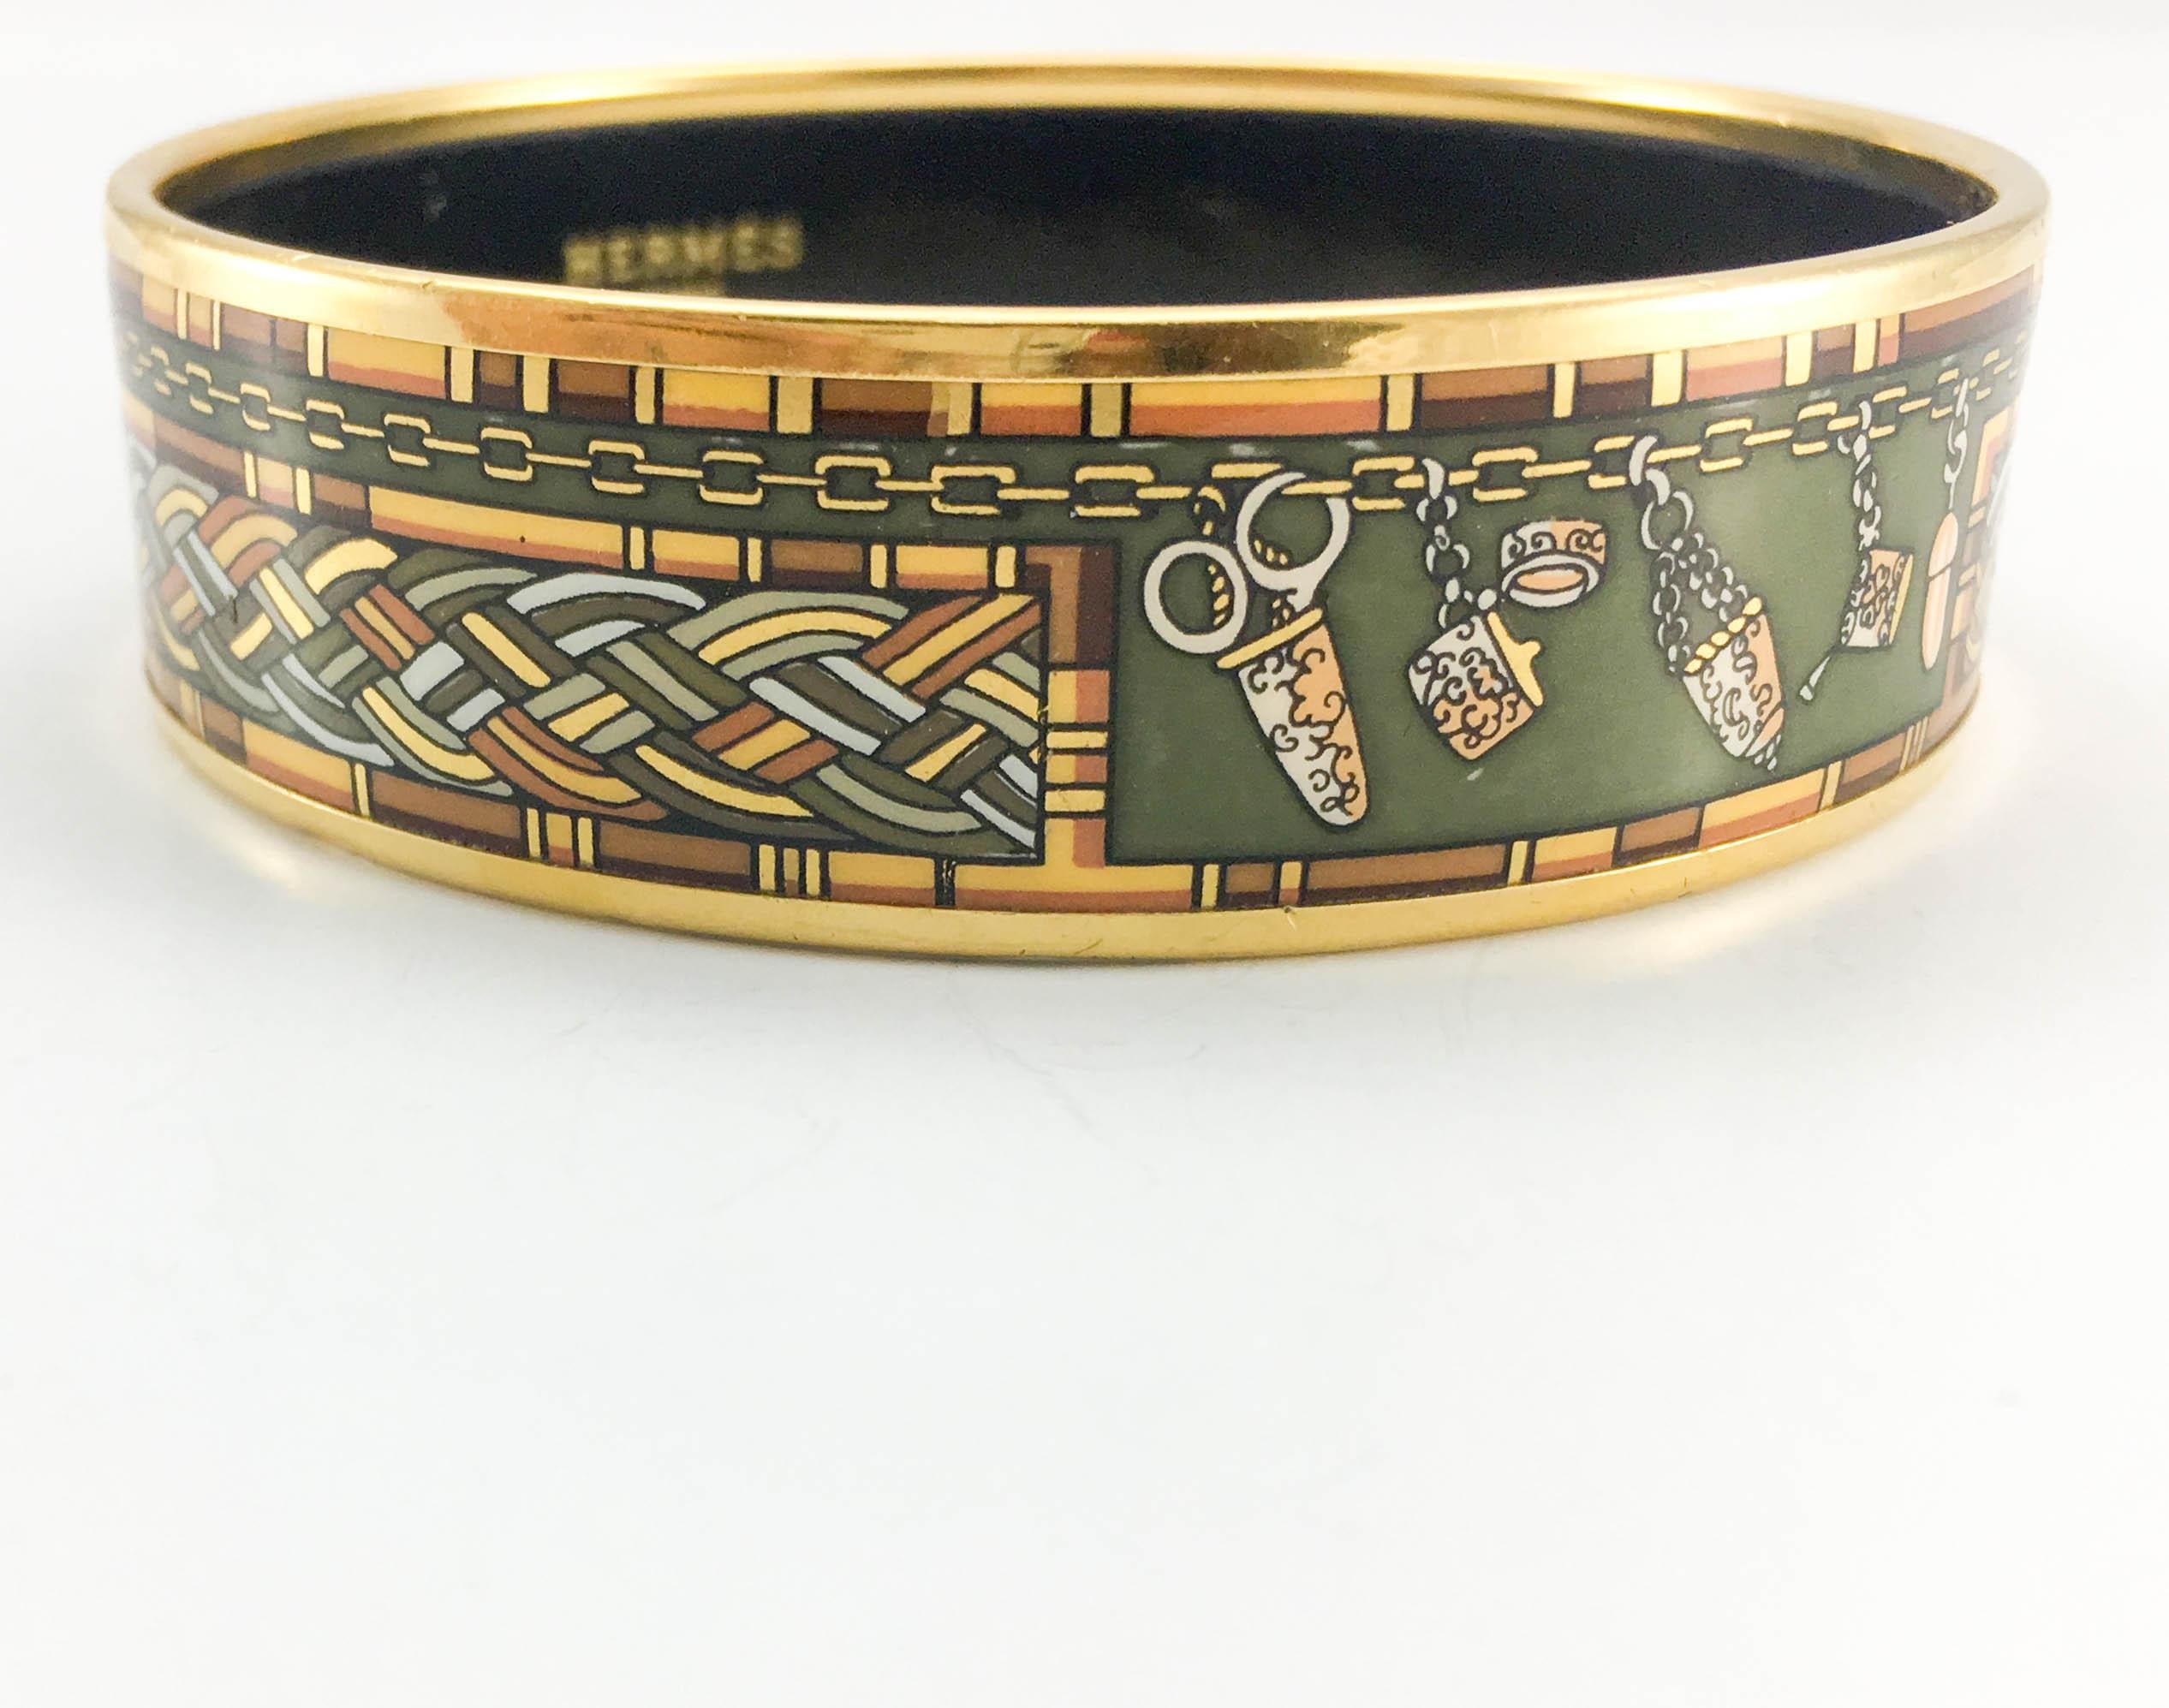 Hermes 'Sewing Kit' Enamel Bangle In Excellent Condition For Sale In London, Chelsea